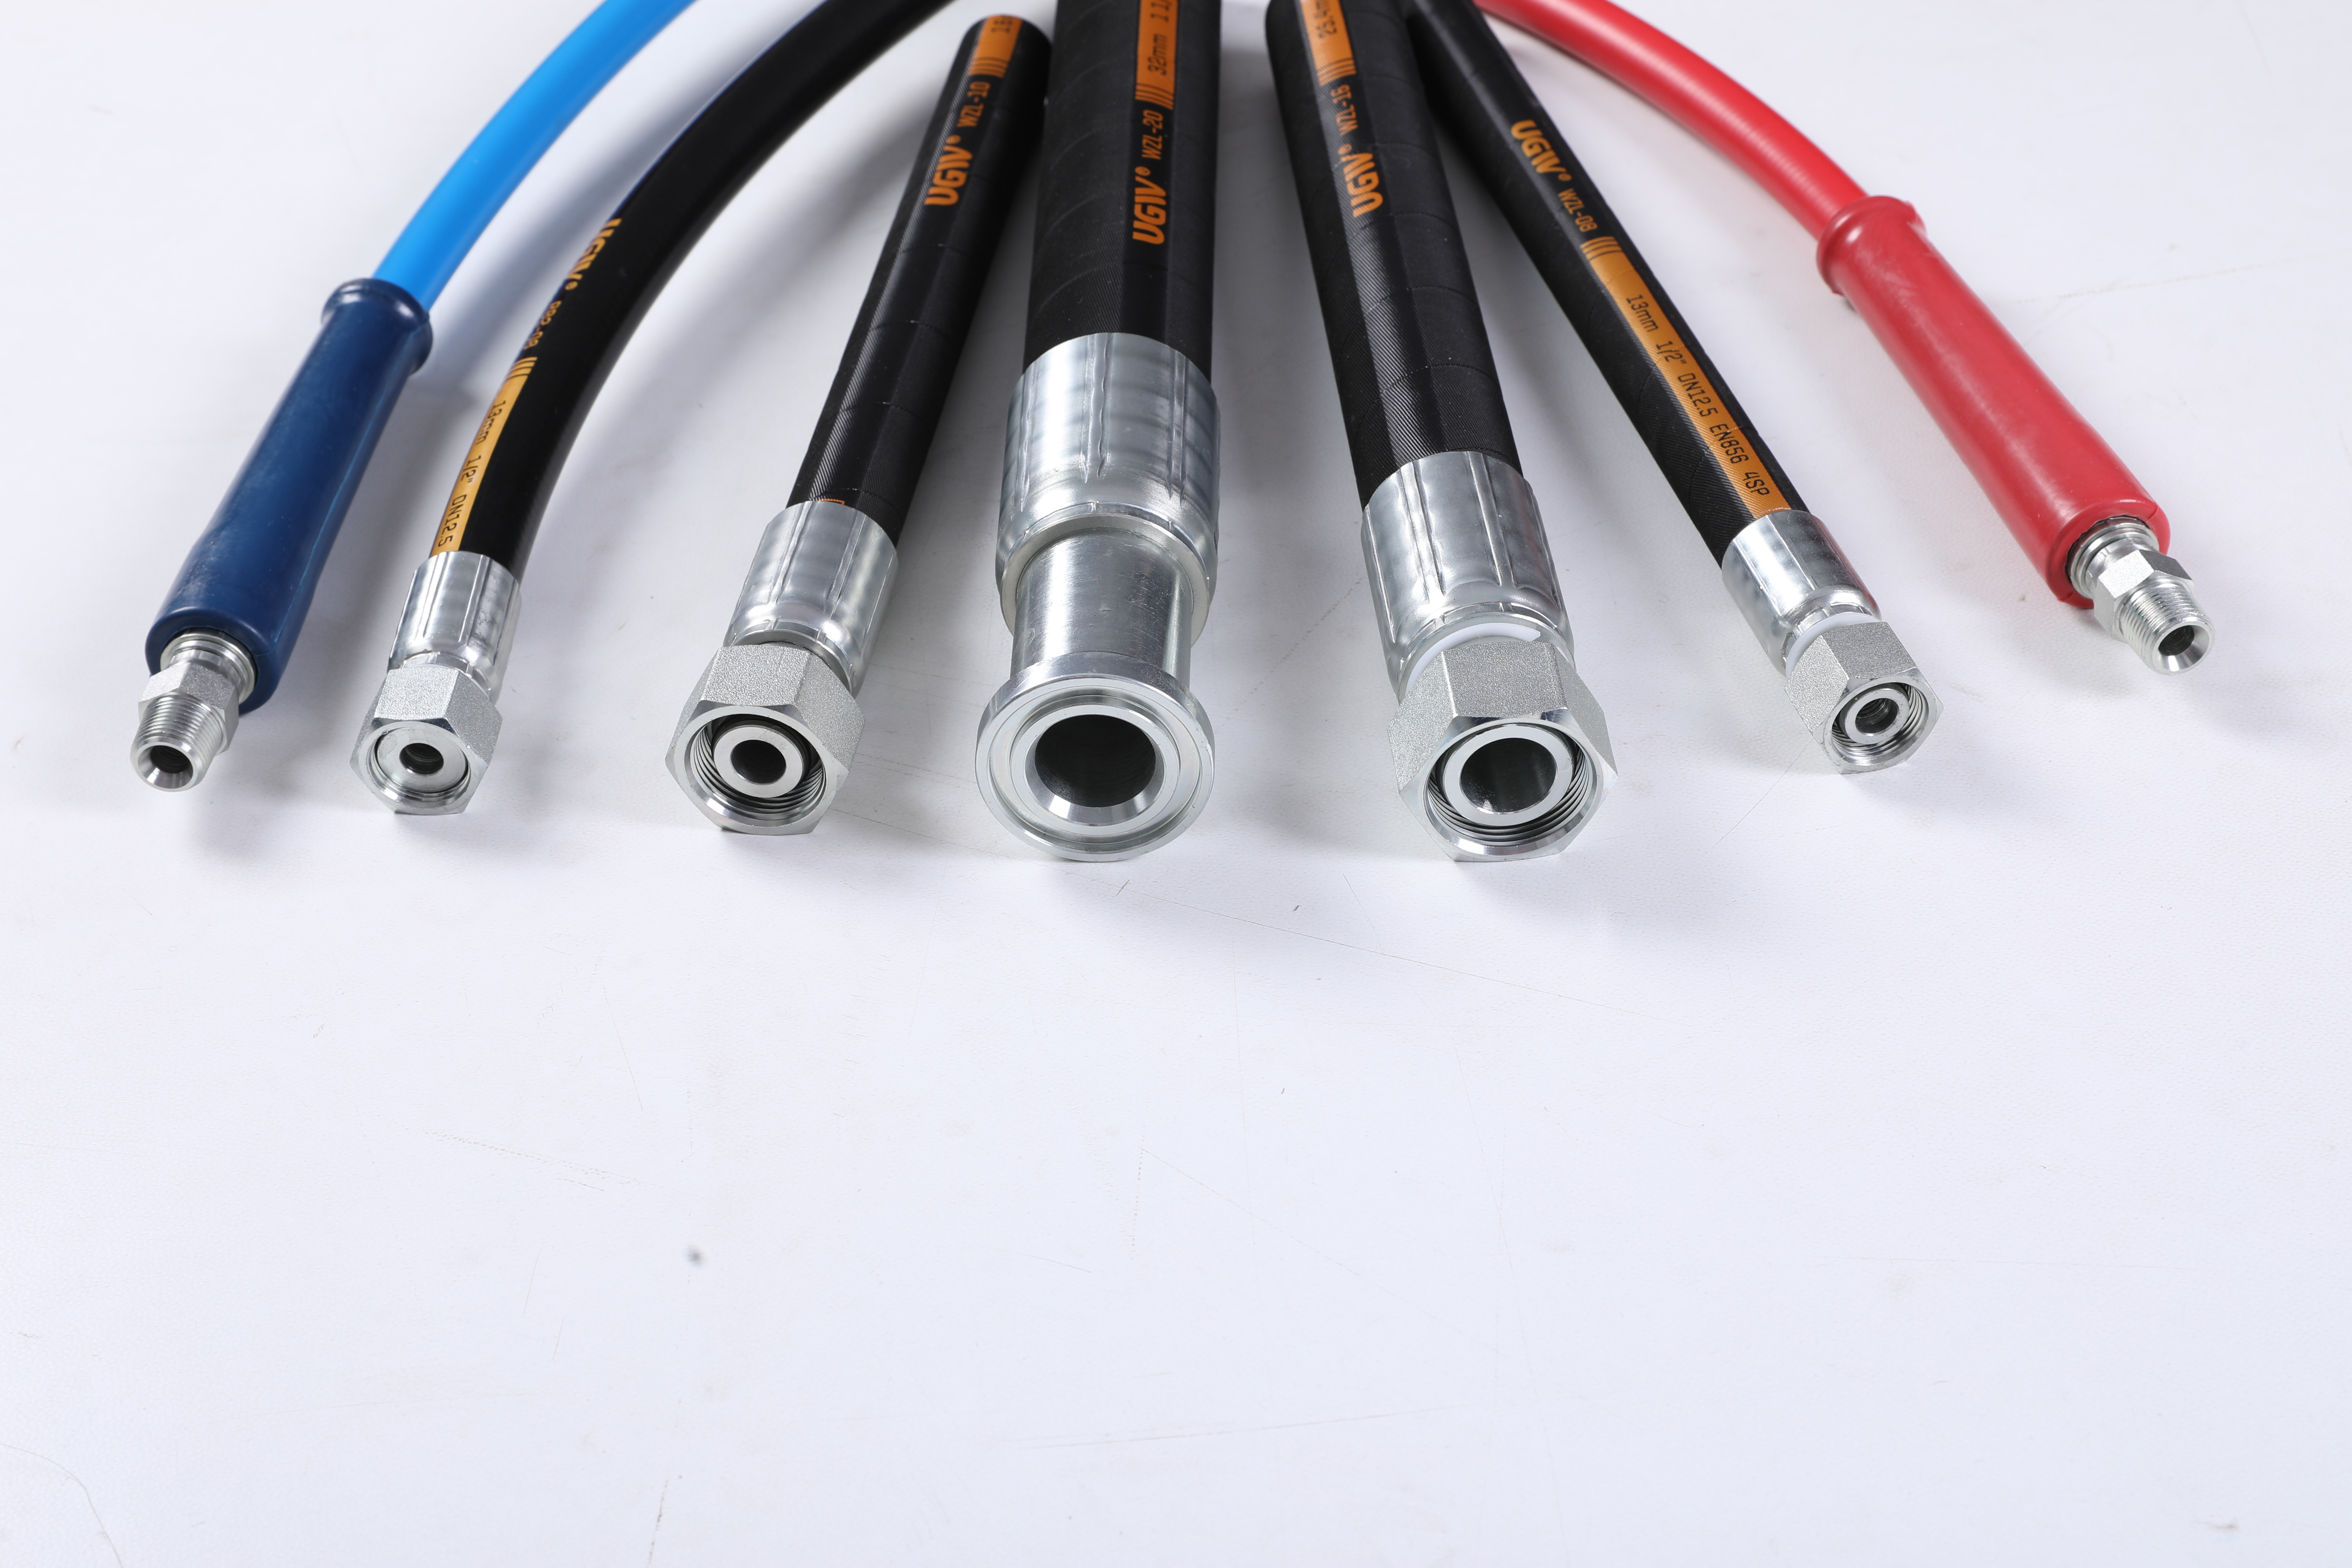 5 Fast facts about hydraulic hose